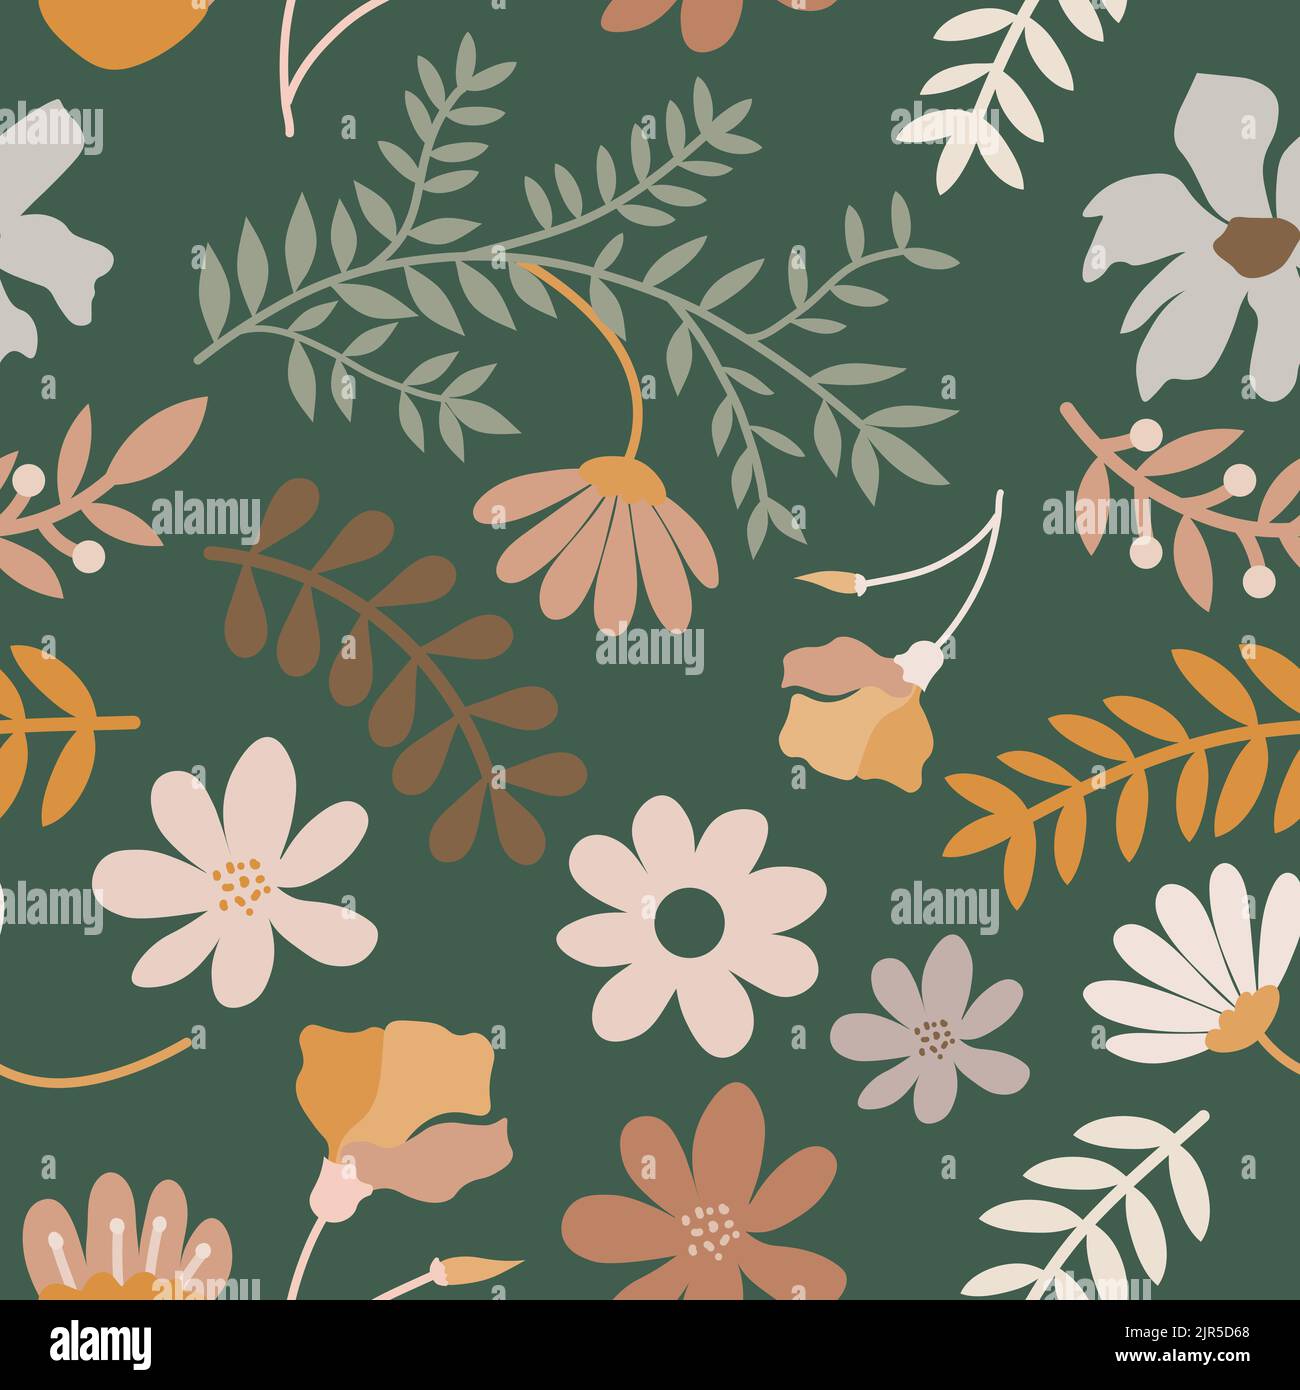 Flowers and twigs seamless pattern Stock Vector